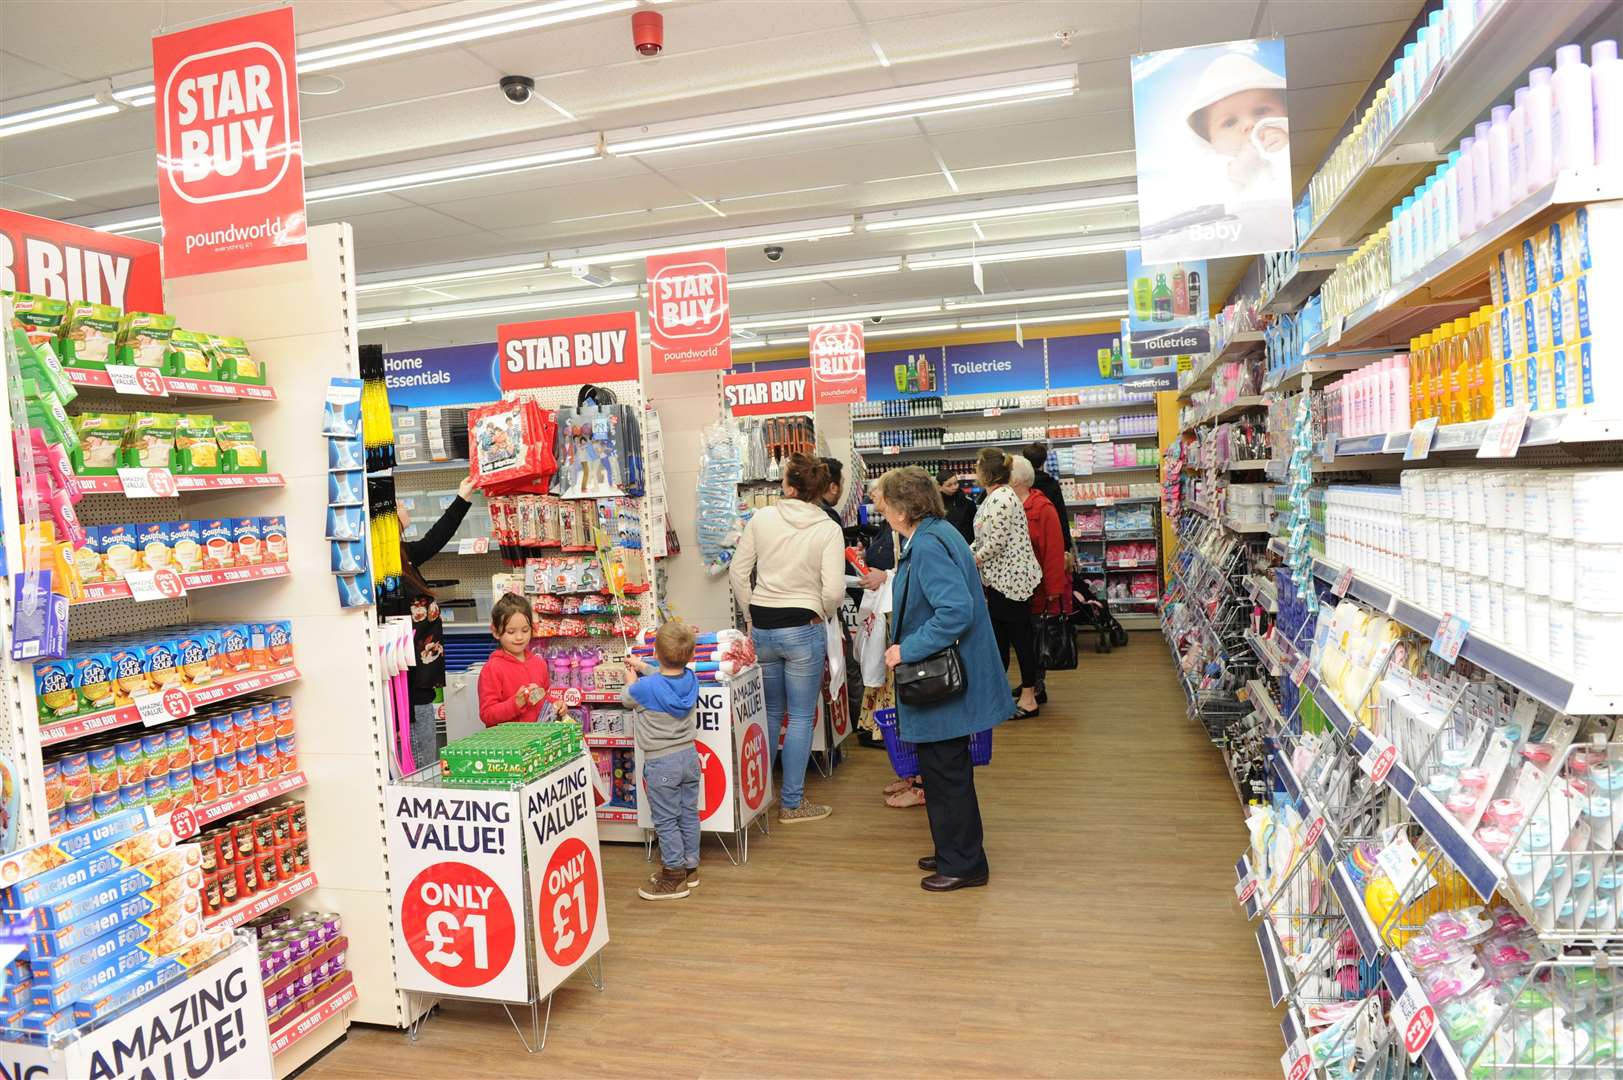 Poundworld went into administration in June